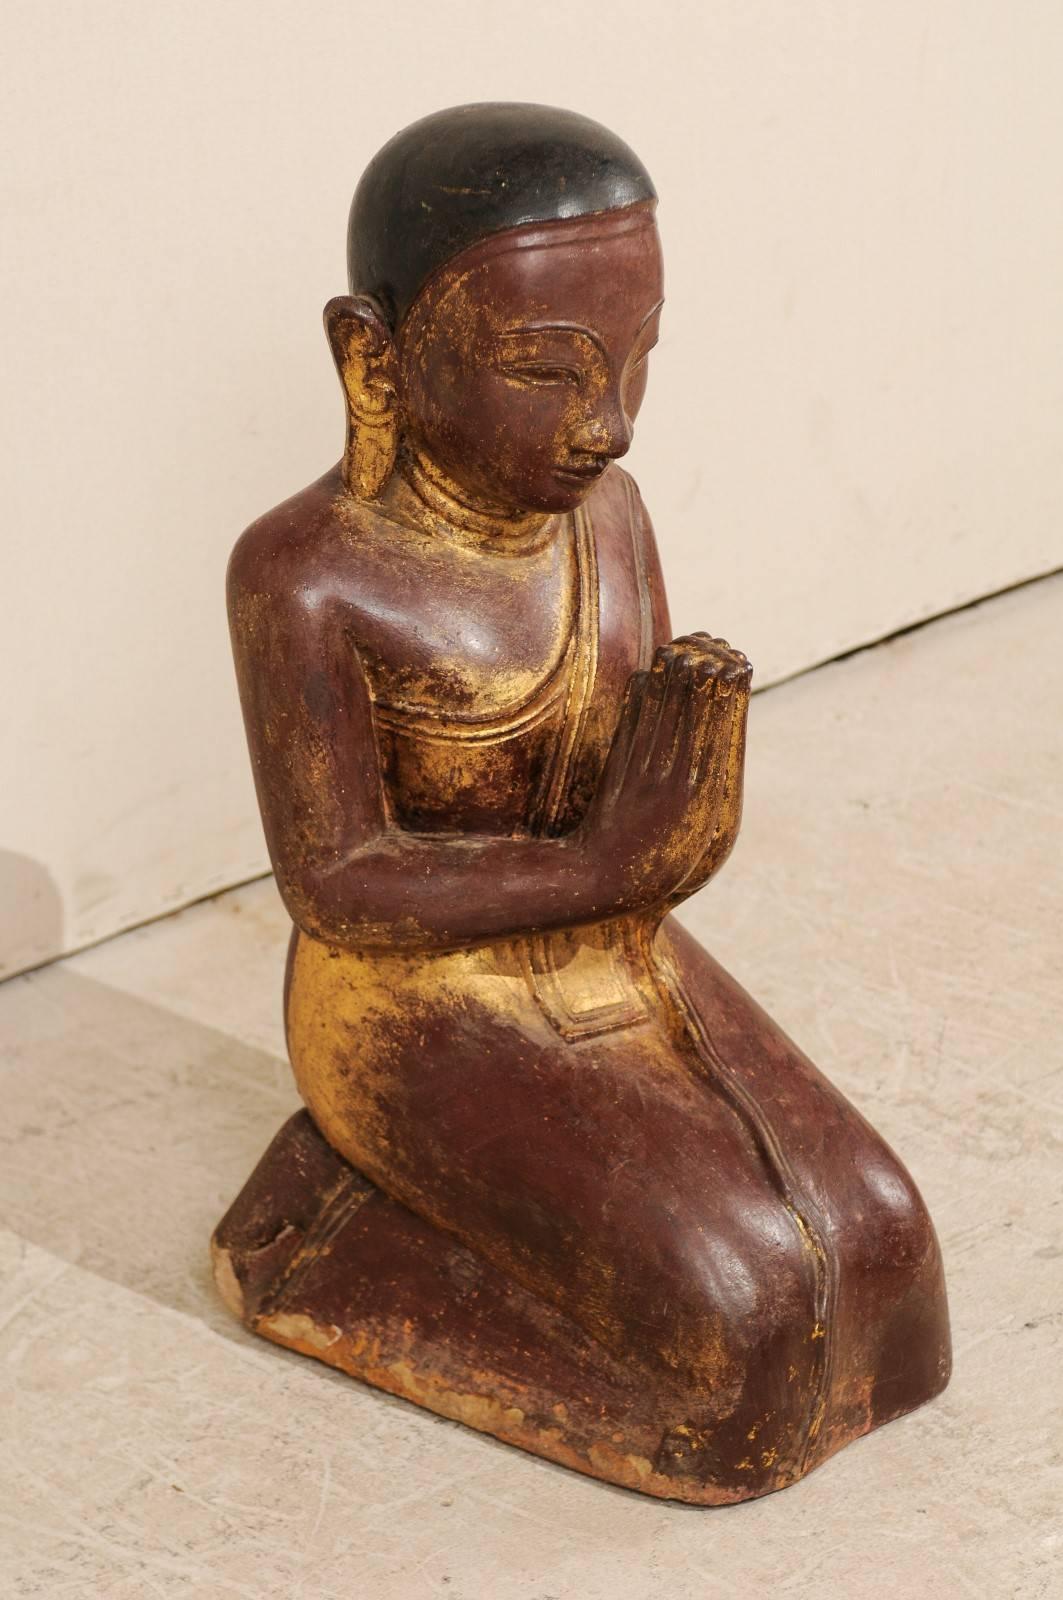 A 19th century sandstone Buddha figure. This Buddha figure of sandstone was hand-carved during the 19th century, though quite possibly the late 18th century. The carved sandstone was finished in a dry lacquer and gilt, and is a beautiful